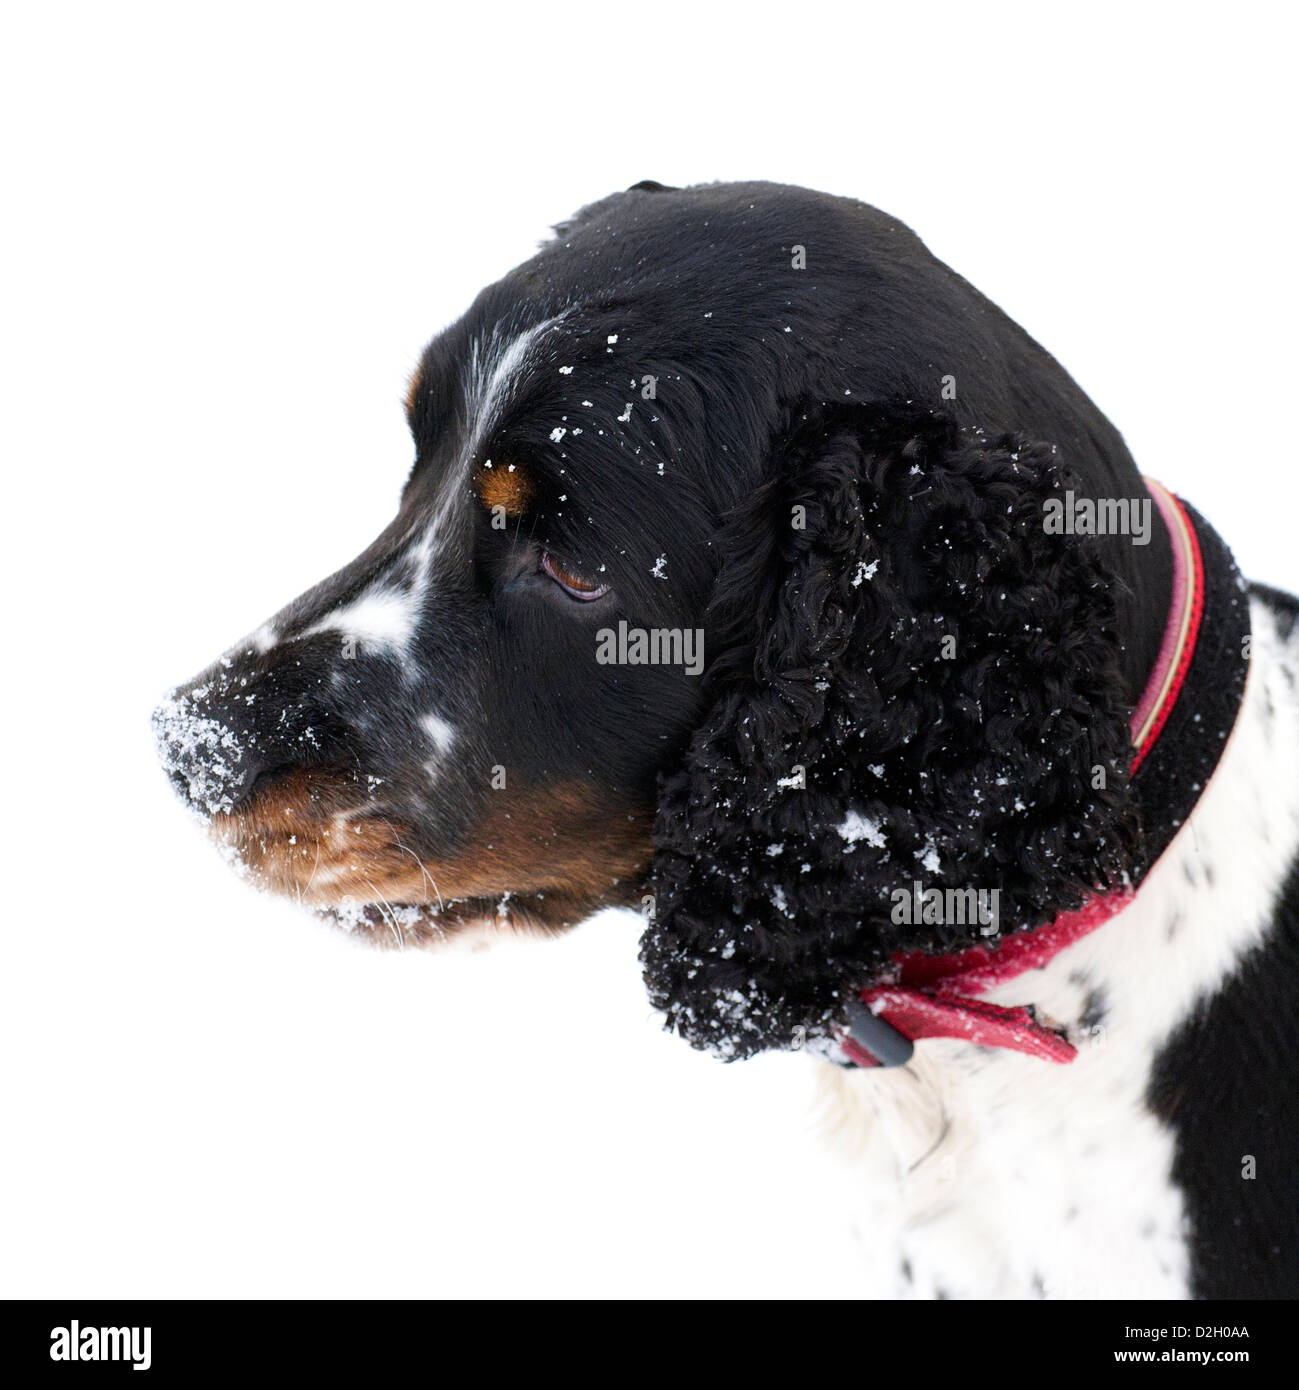 A springer spaniel dog looking at the snow waiting for his next  chance to play and have fun chasing snowballs, a favorite game. Stock Photo